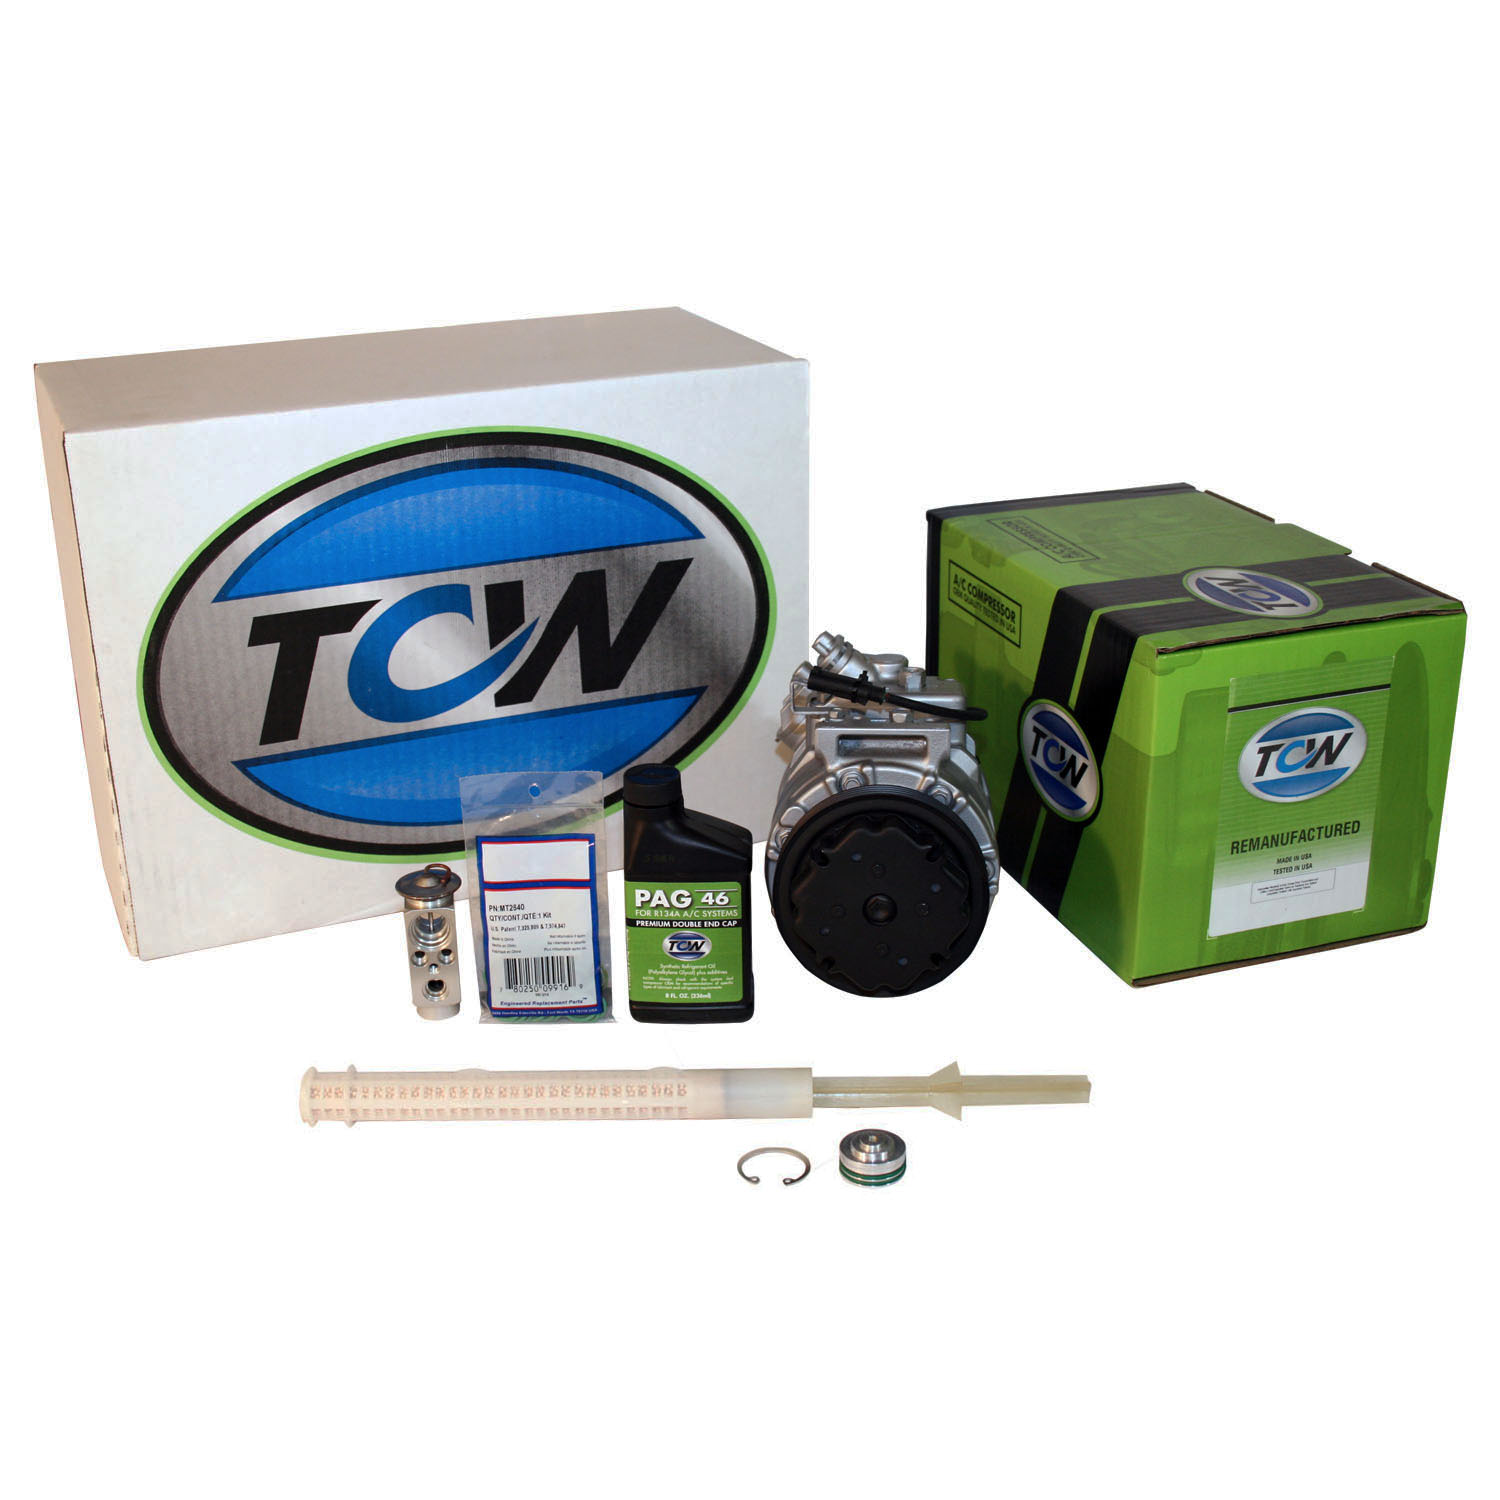 TCW Vehicle A/C Kit K1000429R Remanufactured Product Image field_60b6a13a6e67c